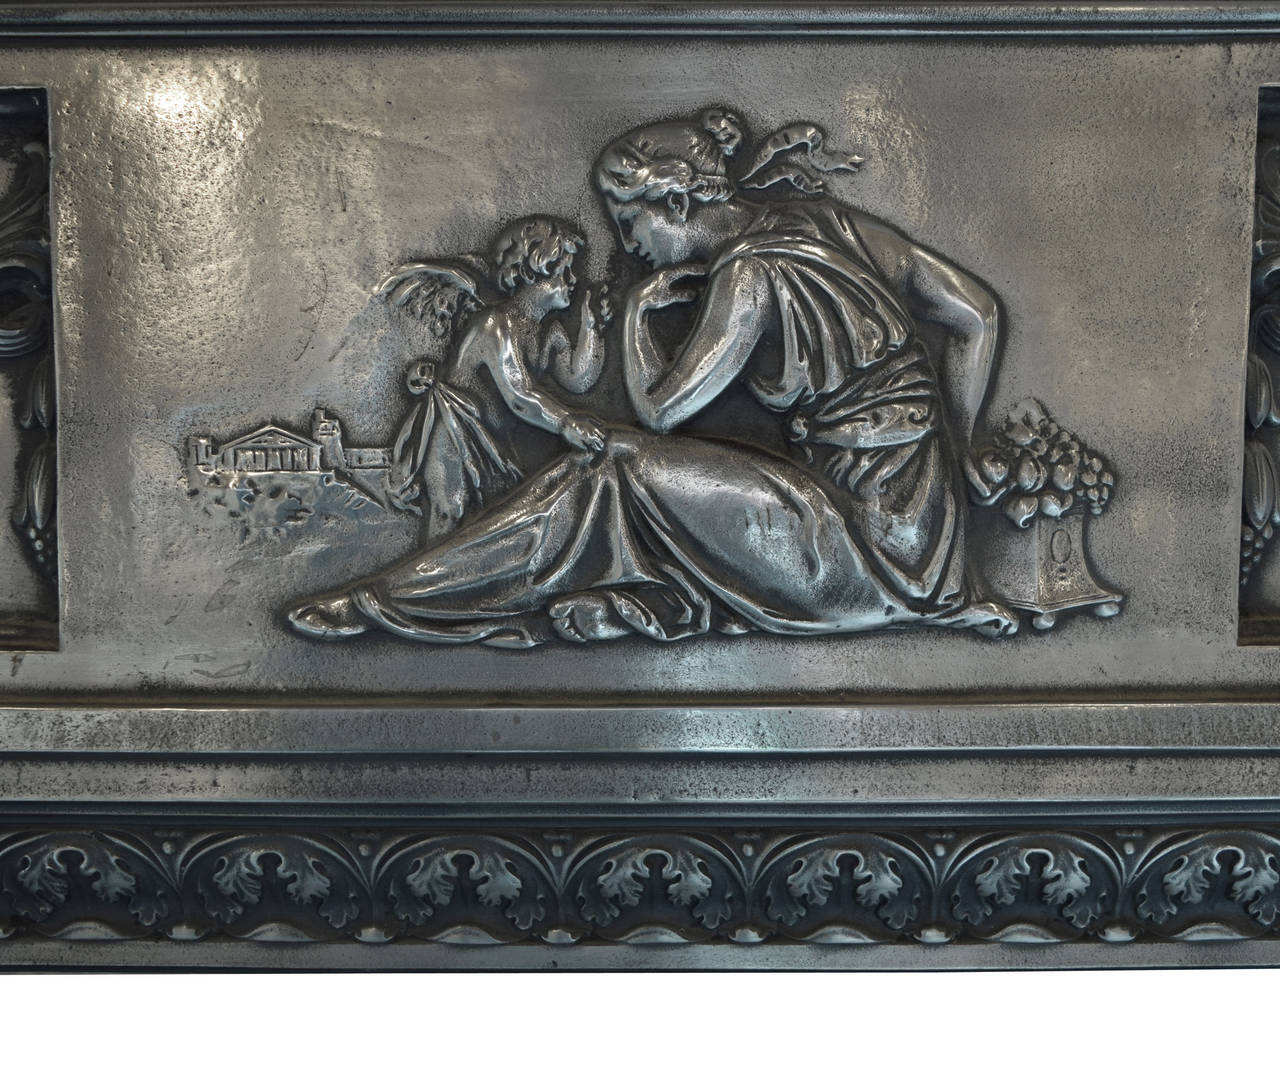 A 19th century English polished cast iron fireplace surround with a classical depiction of a goddess consorting with Cupid and decorated with other classical motifs like rosettes, floral festoons and acanthus leaf trim.